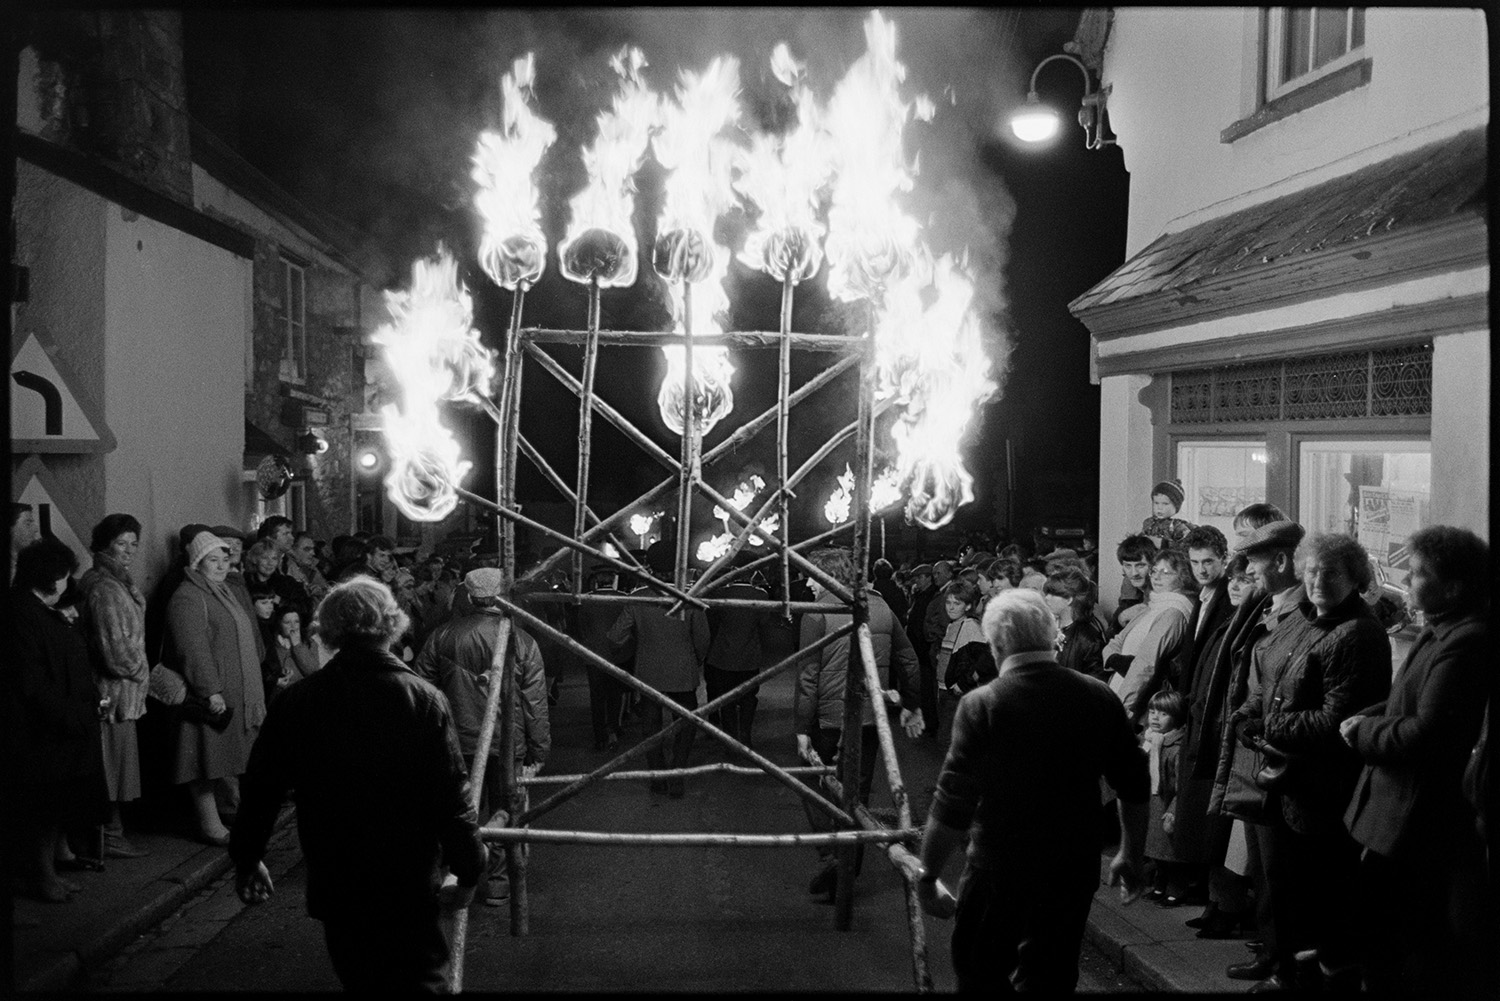 Carnival procession at night with burning torches and blazing tar barrels, floats.
[Four men walking down a street carrying a timber frame of burning torches  at Hatherleigh Carnival. Spectators are lining the street watching.]